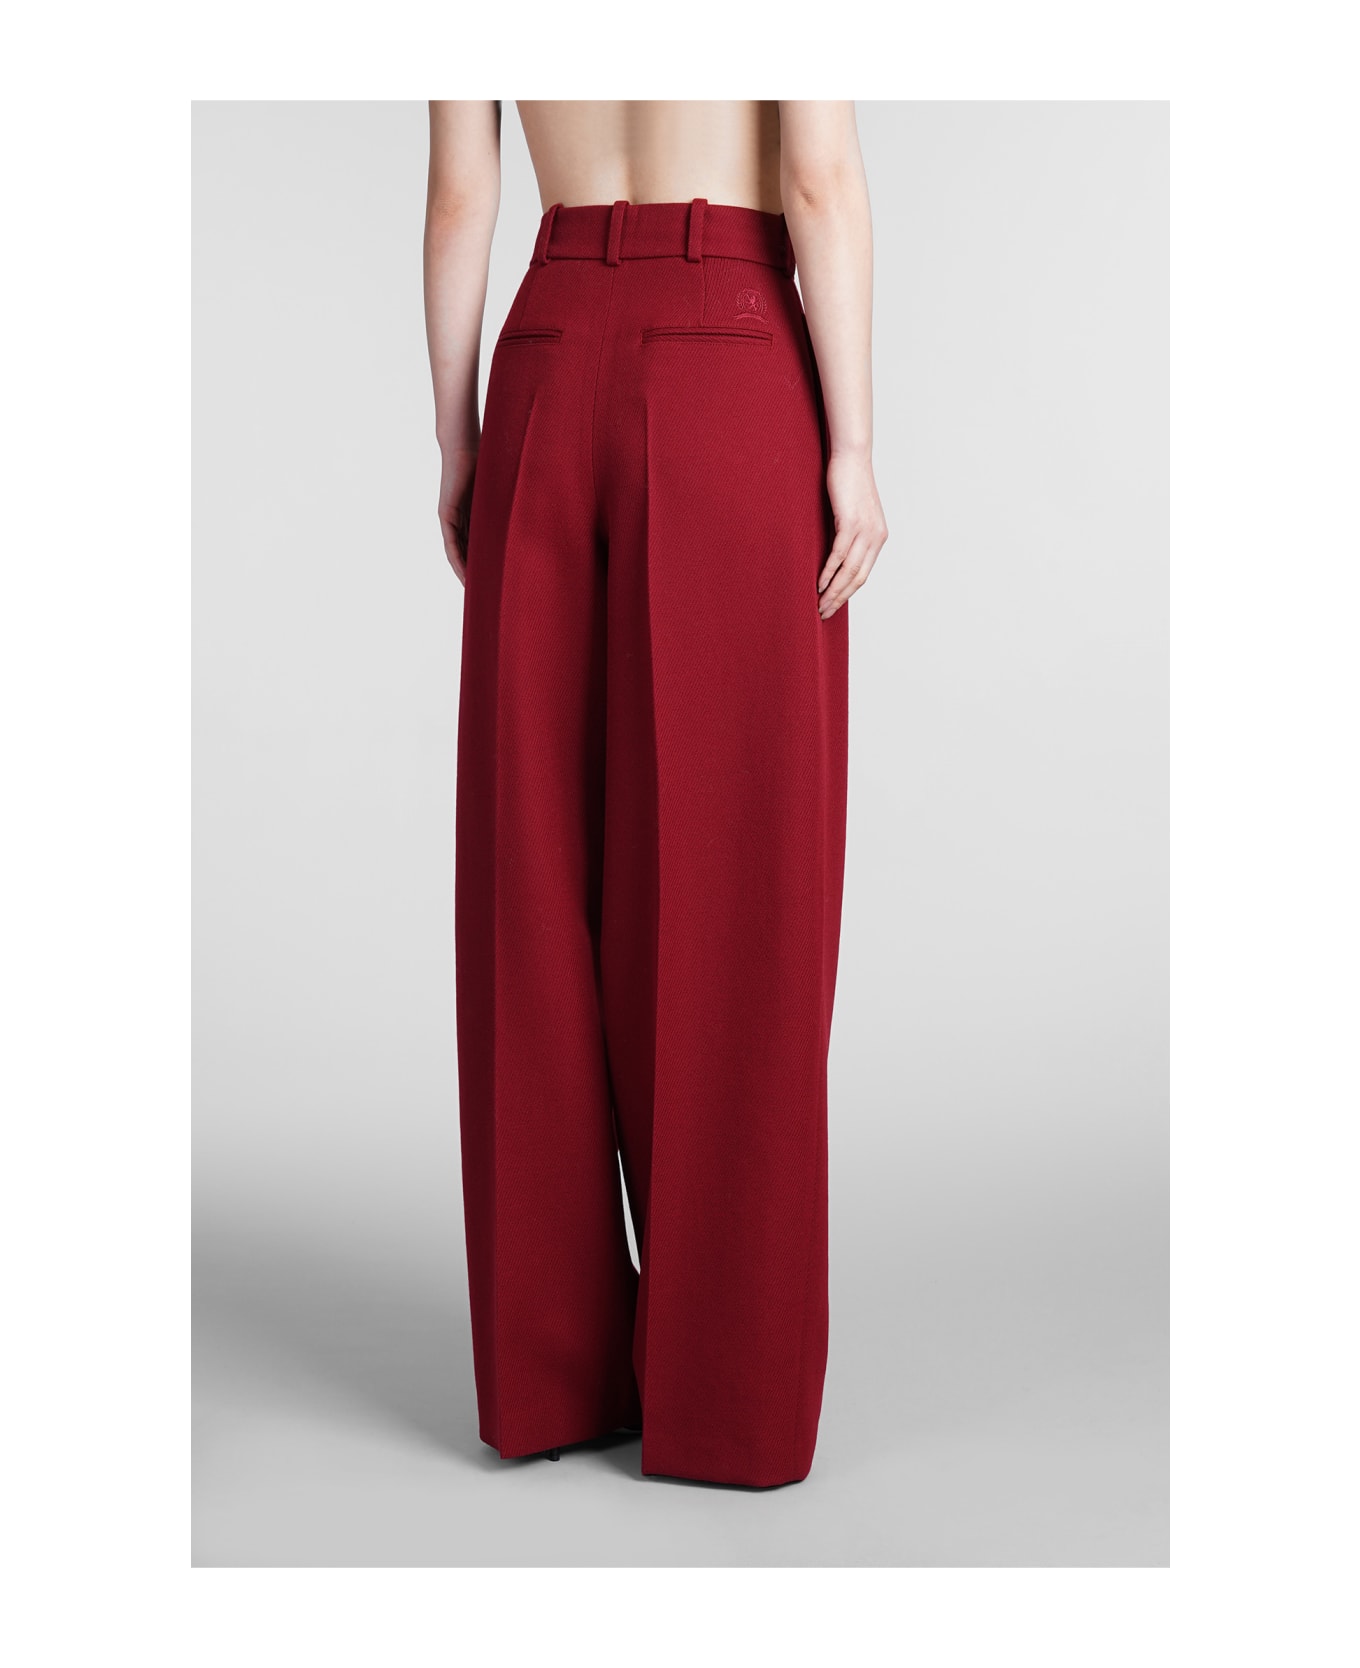 Tommy Hilfiger Pants In Bordeaux Wool - Red